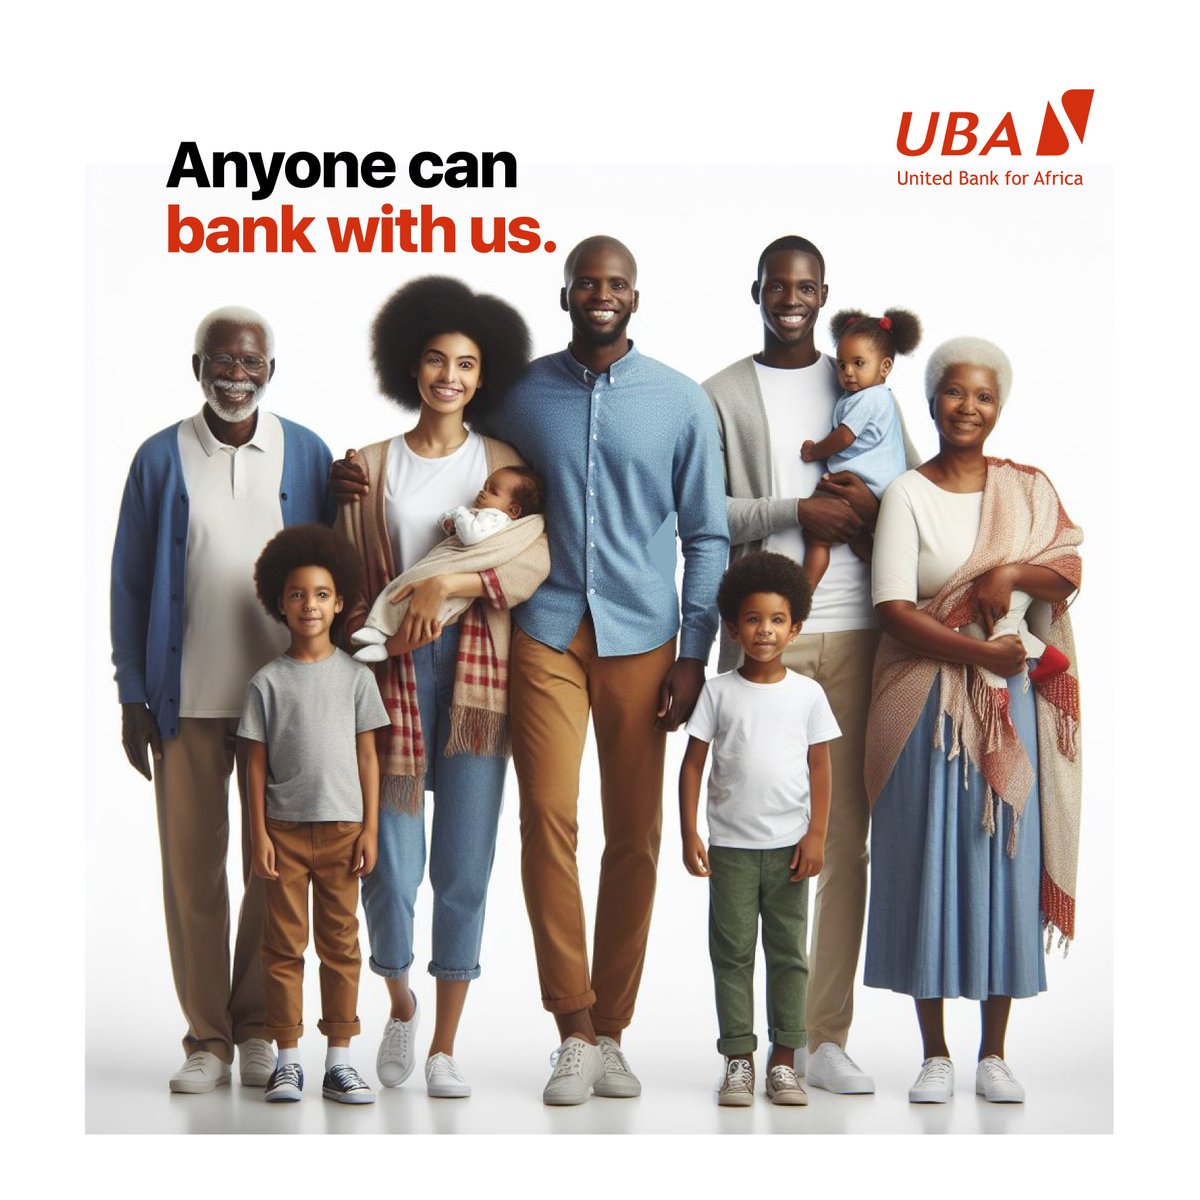 𝐀𝐧𝐲𝐨𝐧𝐞 𝐜𝐚𝐧 𝐛𝐚𝐧𝐤 𝐰𝐢𝐭𝐡 𝐮𝐬!

To get started, simply visit any UBA branch countrywide and open a UBA Savings Account for anyone, from 0 to 100+ years.

#AfricasGlobalBank #SavingsAccount #UBACares